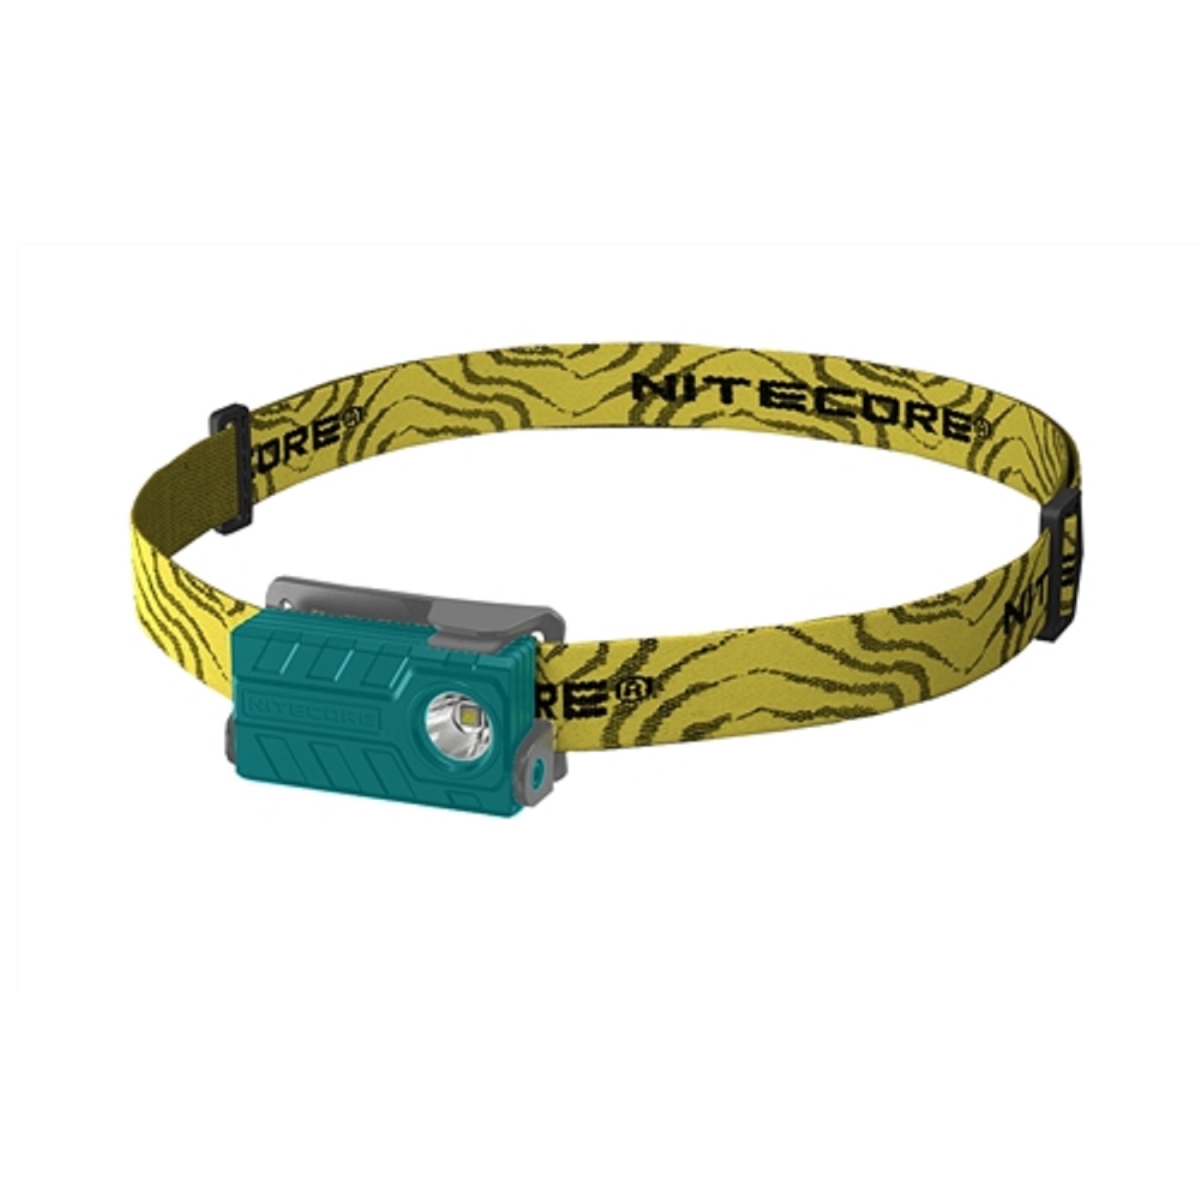 Nitecore Sysmax Industrial 9004722 360 Lumens Usb Rechargeable Lightweight Headlamp - Green